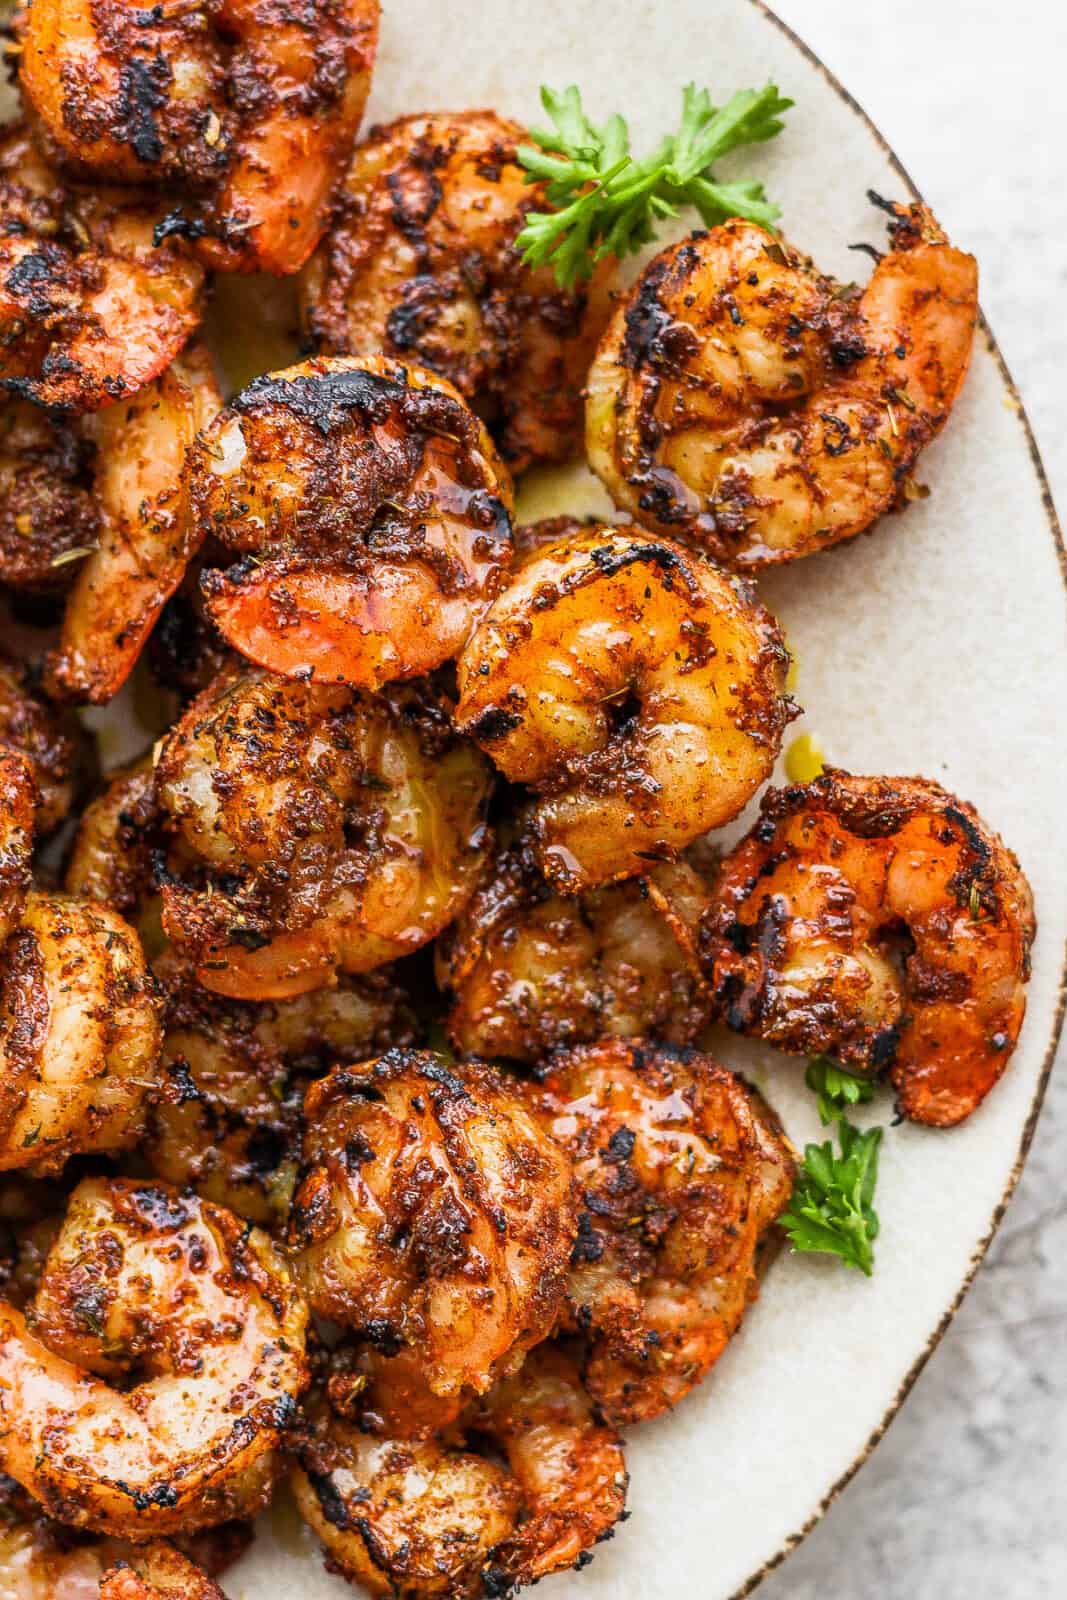 A plate of grilled blackened shrimp.